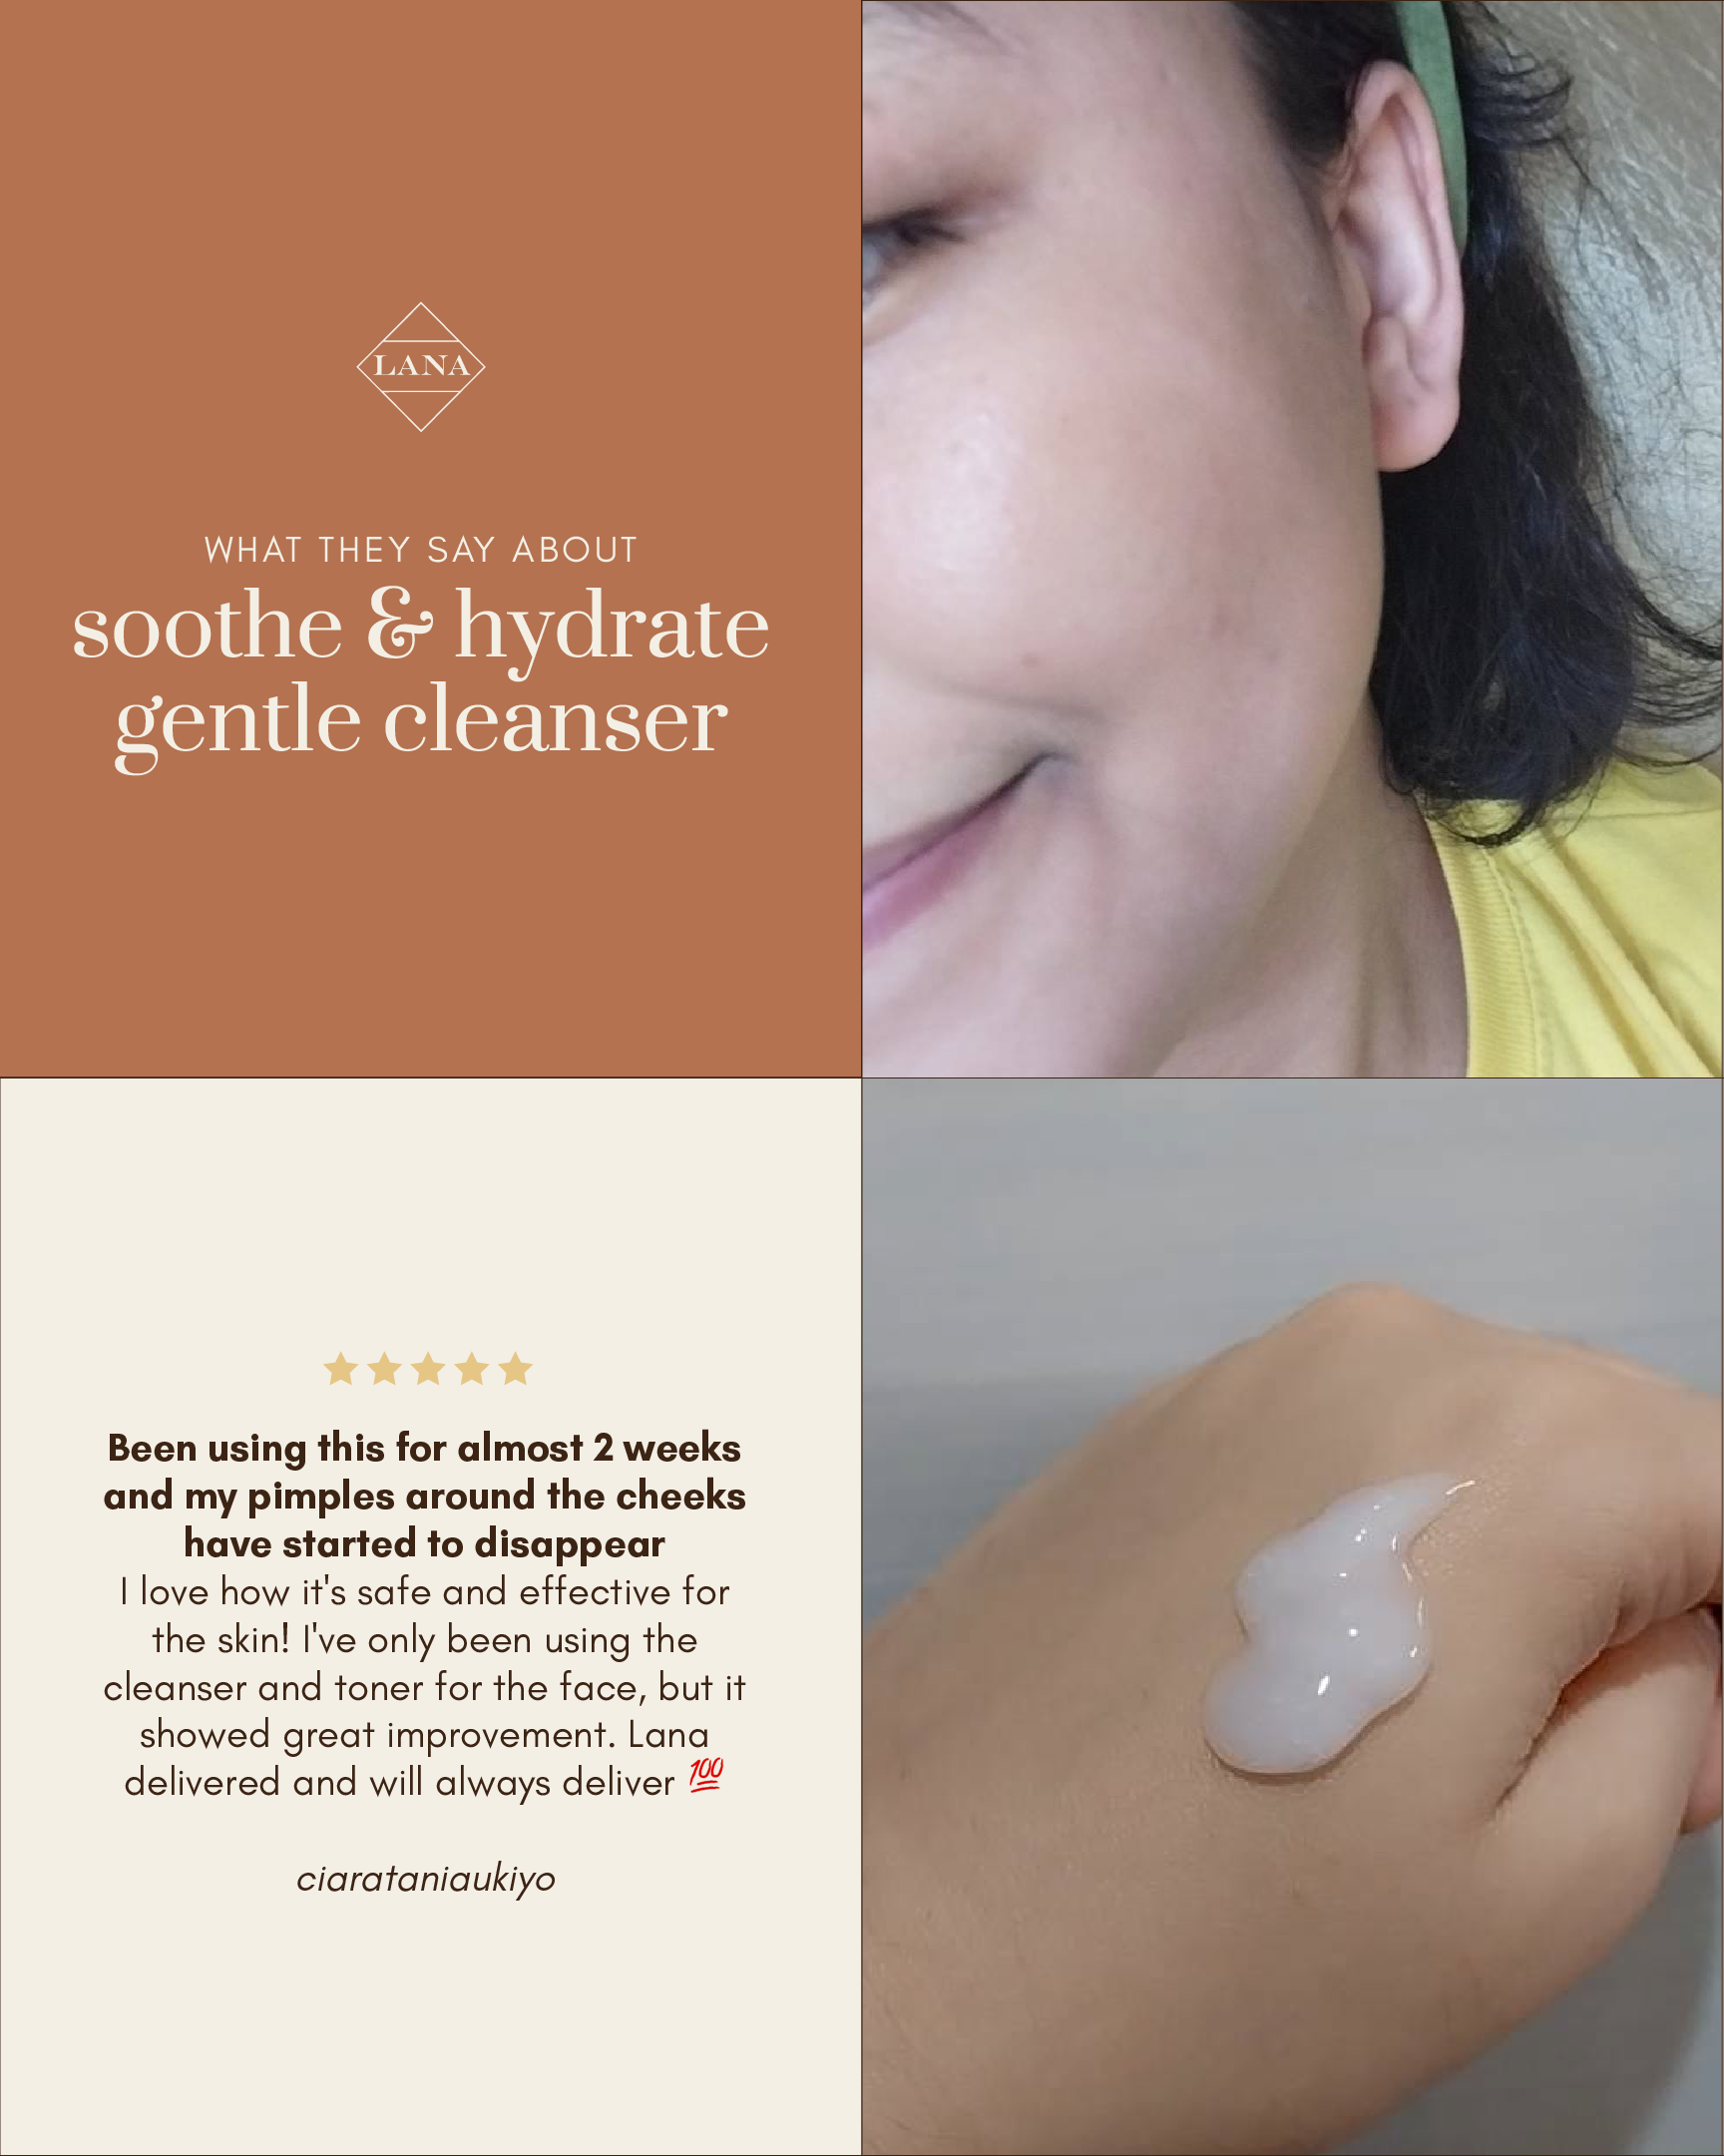 Soothe & Hydrate Gentle Cleanser